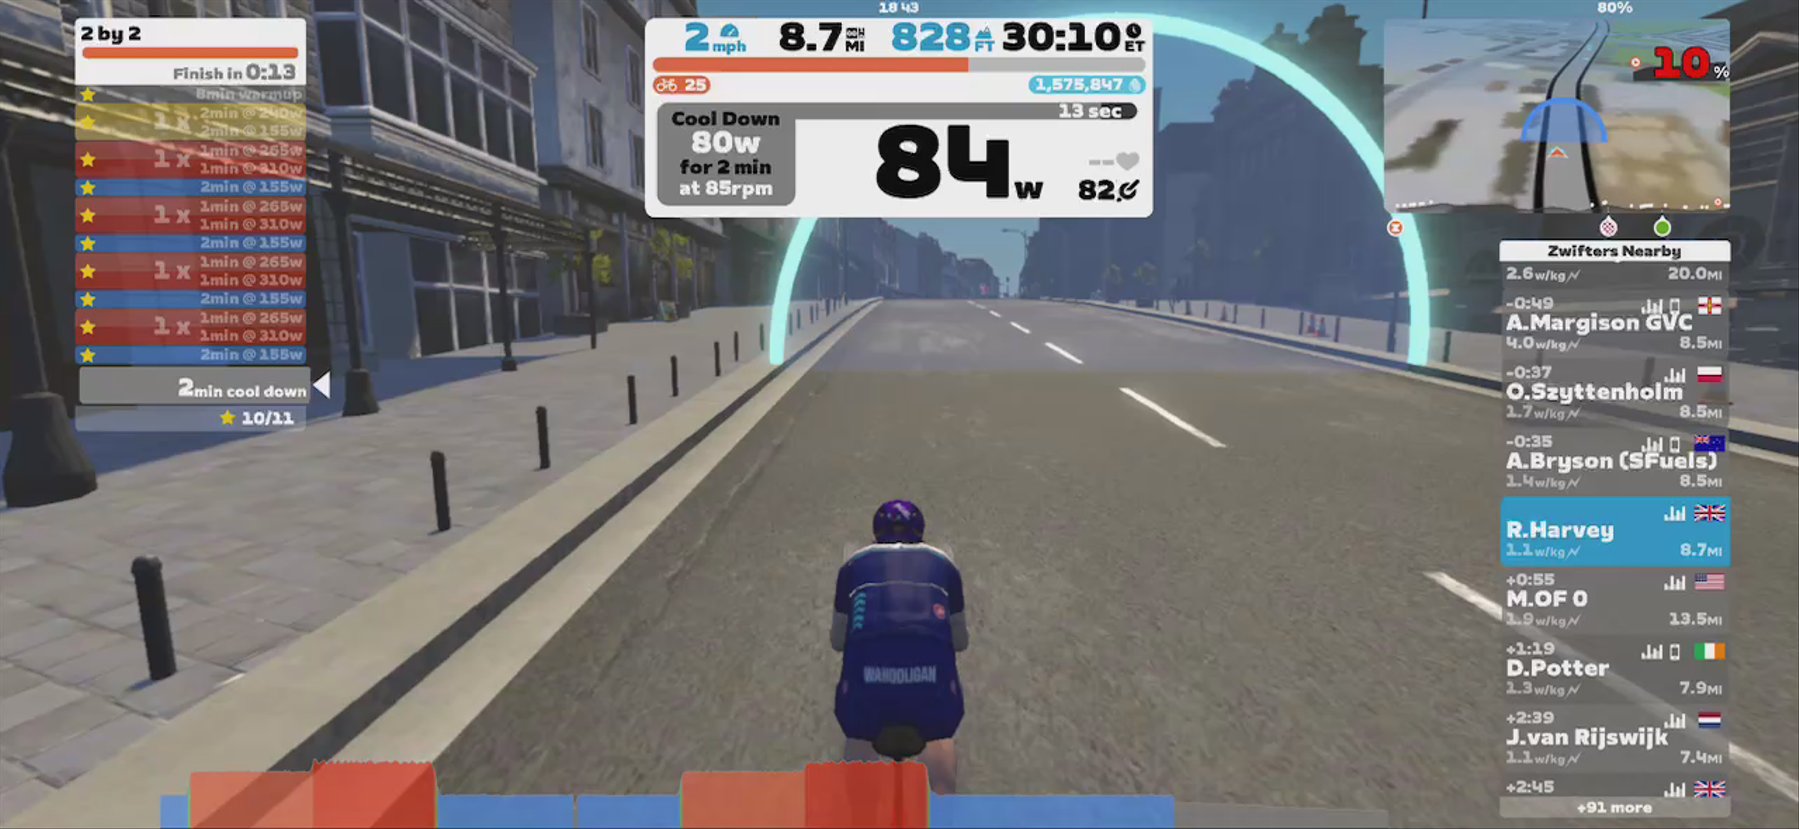 Zwift - 2 by 2 in Yorkshire